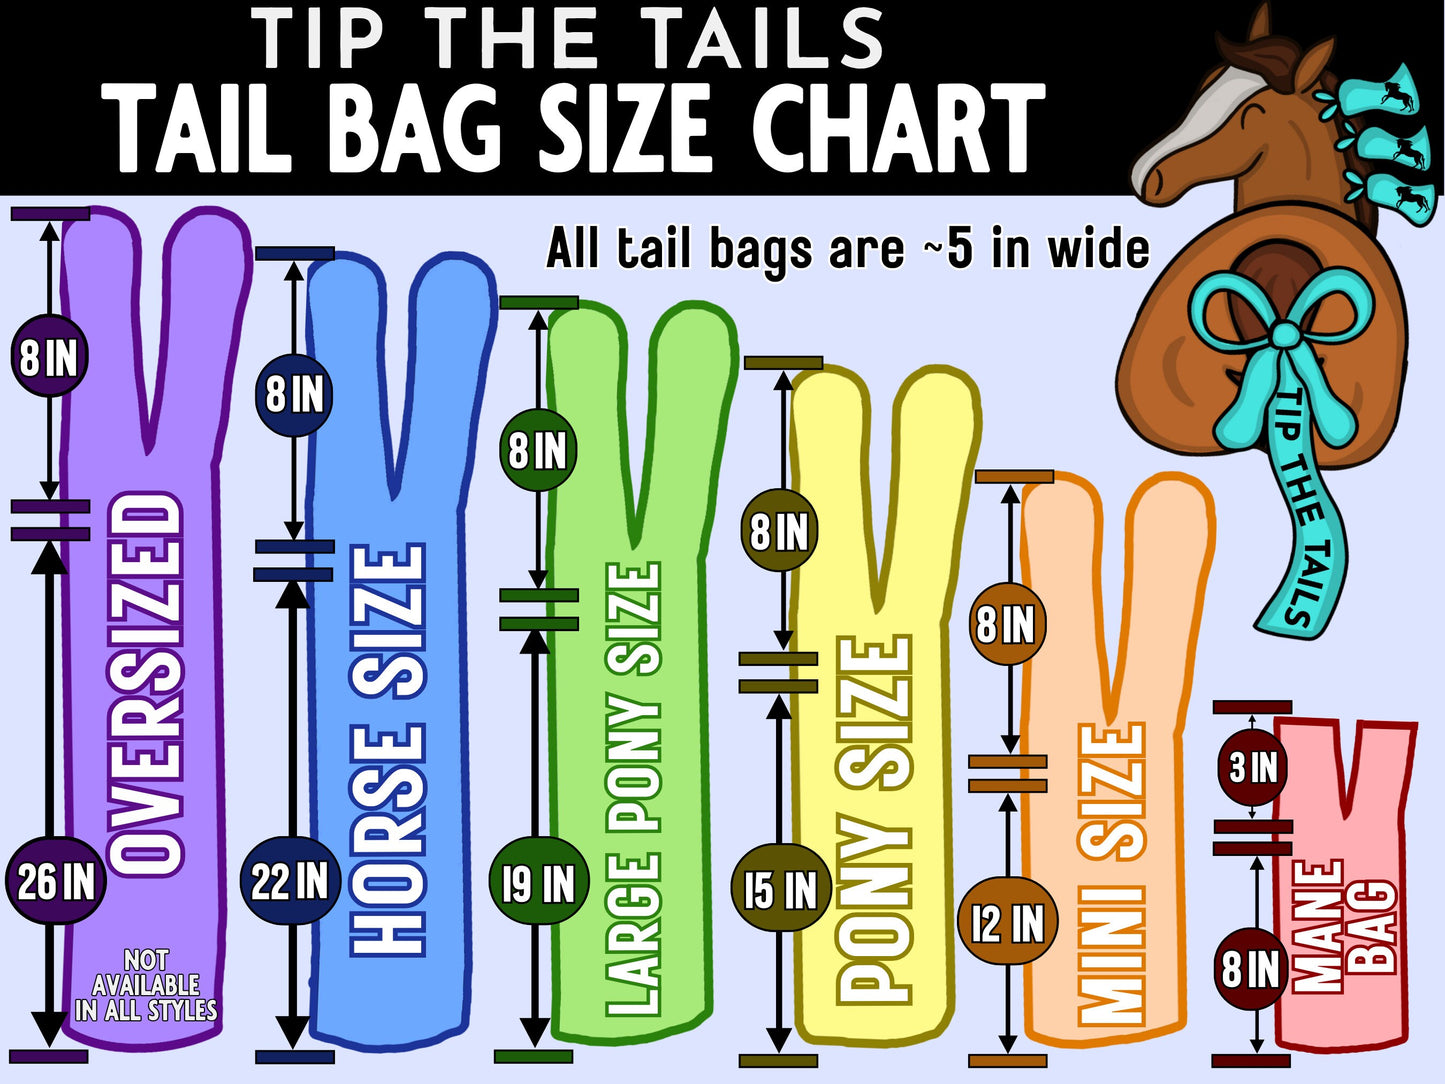 Shit Head Equine Tail Bag-Tip The Tails